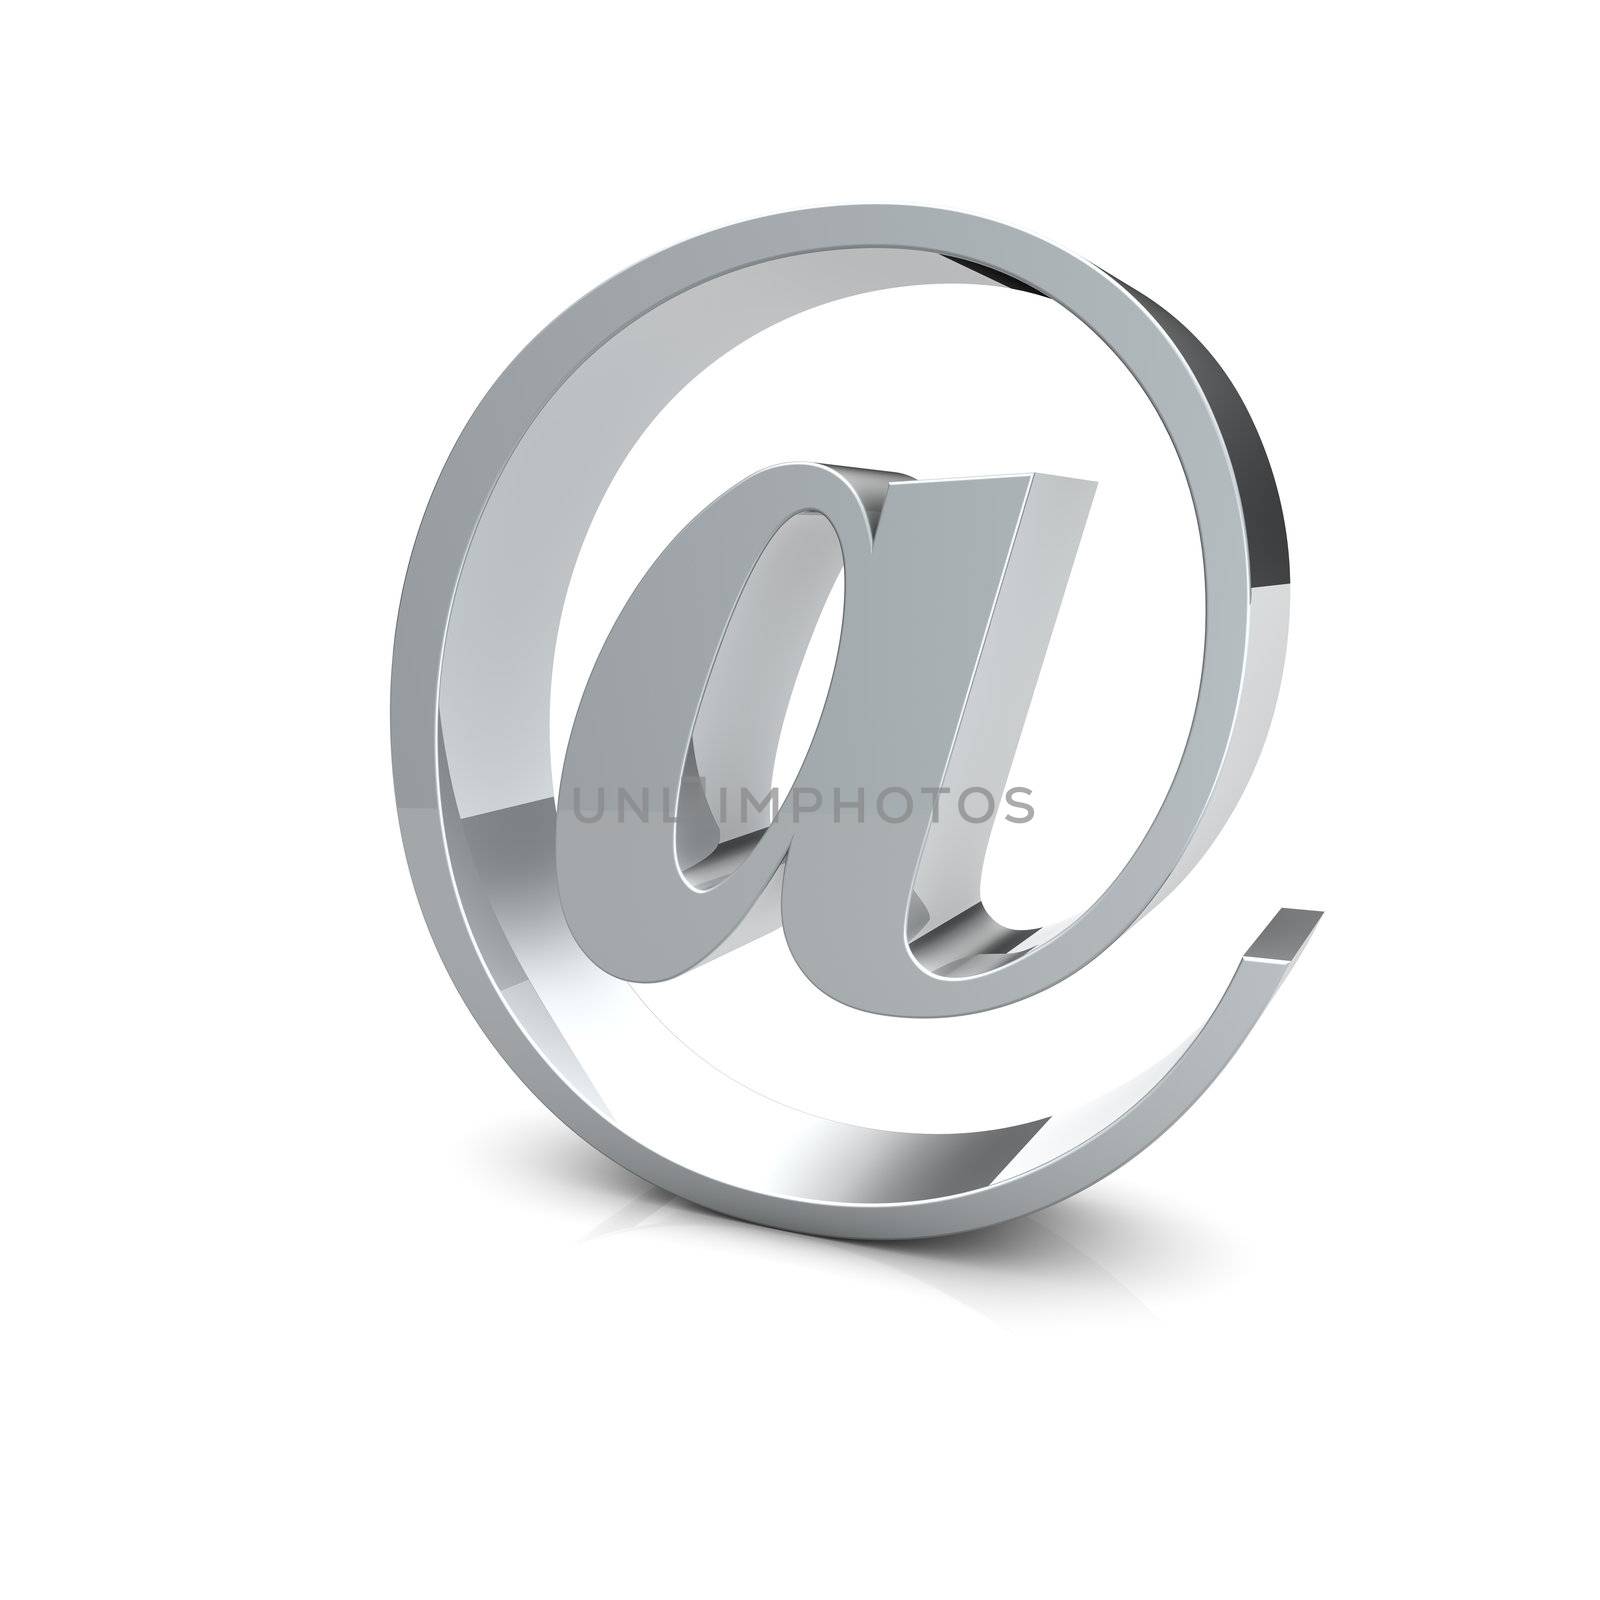 E-mail symbol by froxx